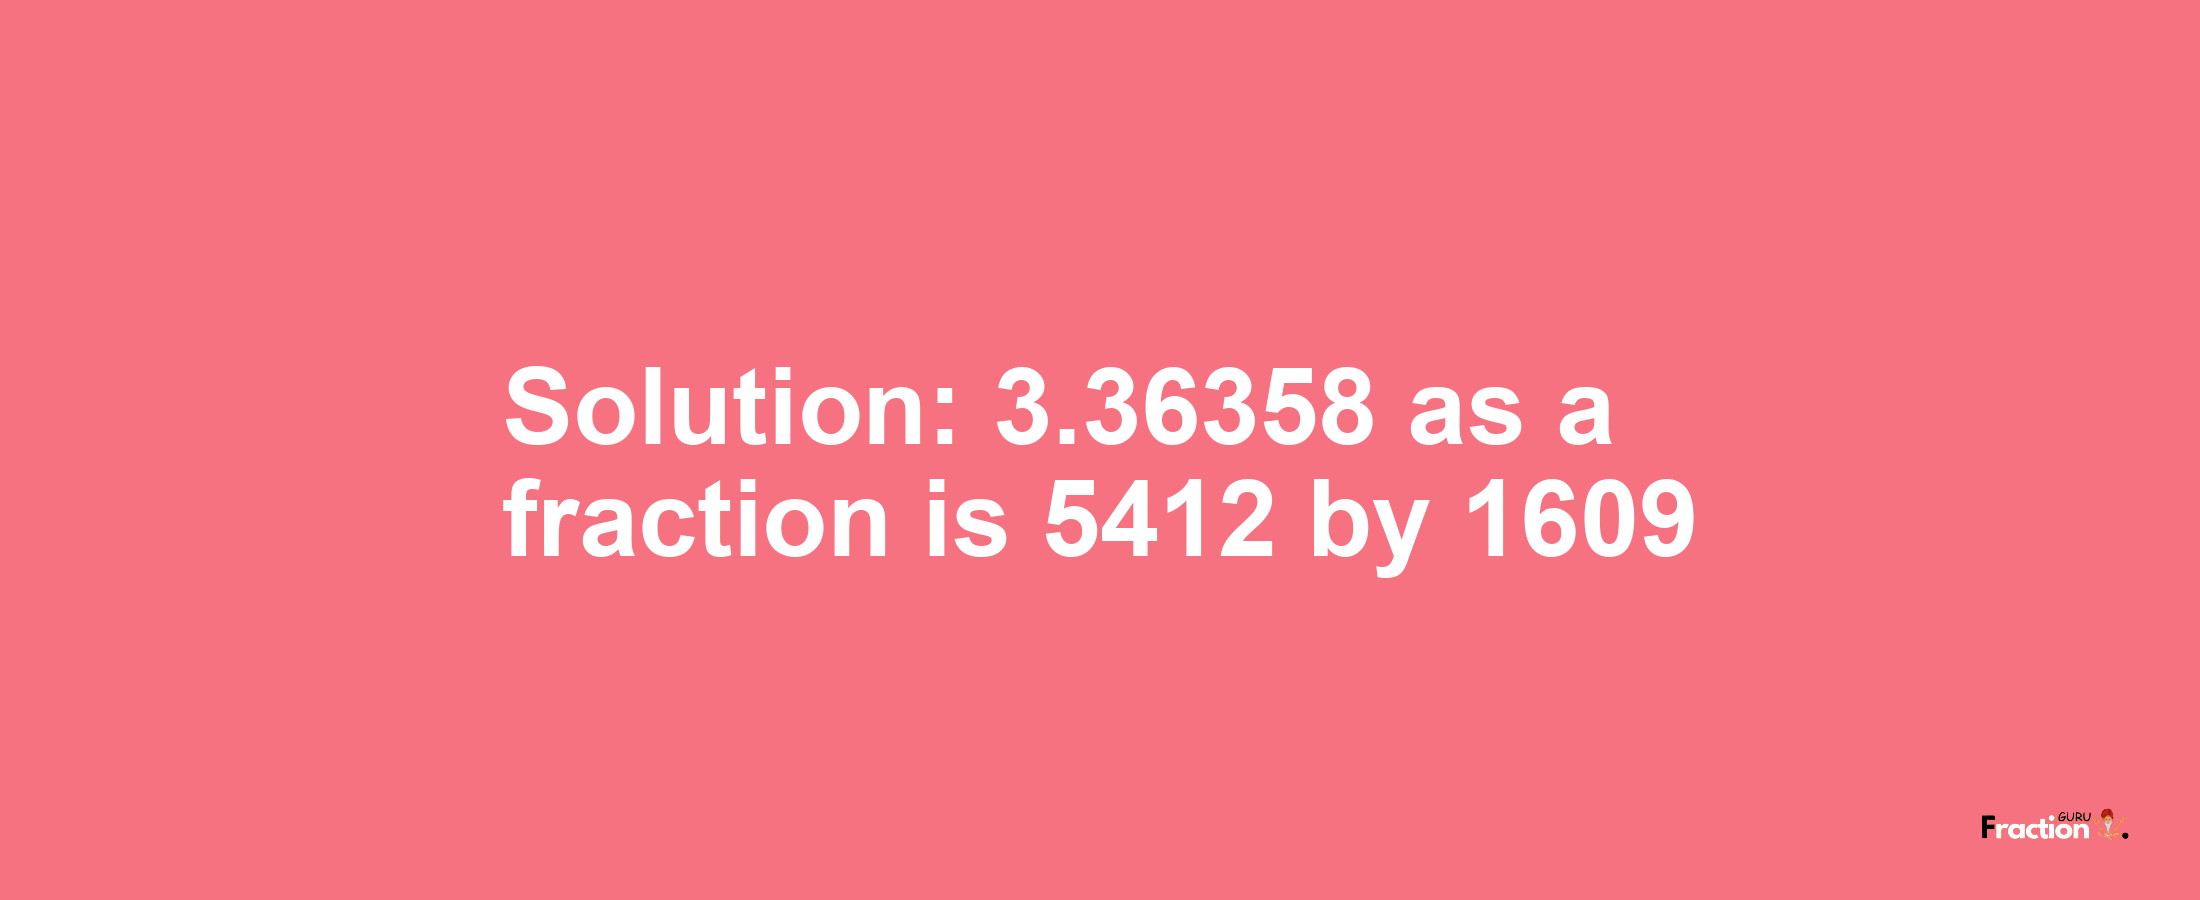 Solution:3.36358 as a fraction is 5412/1609